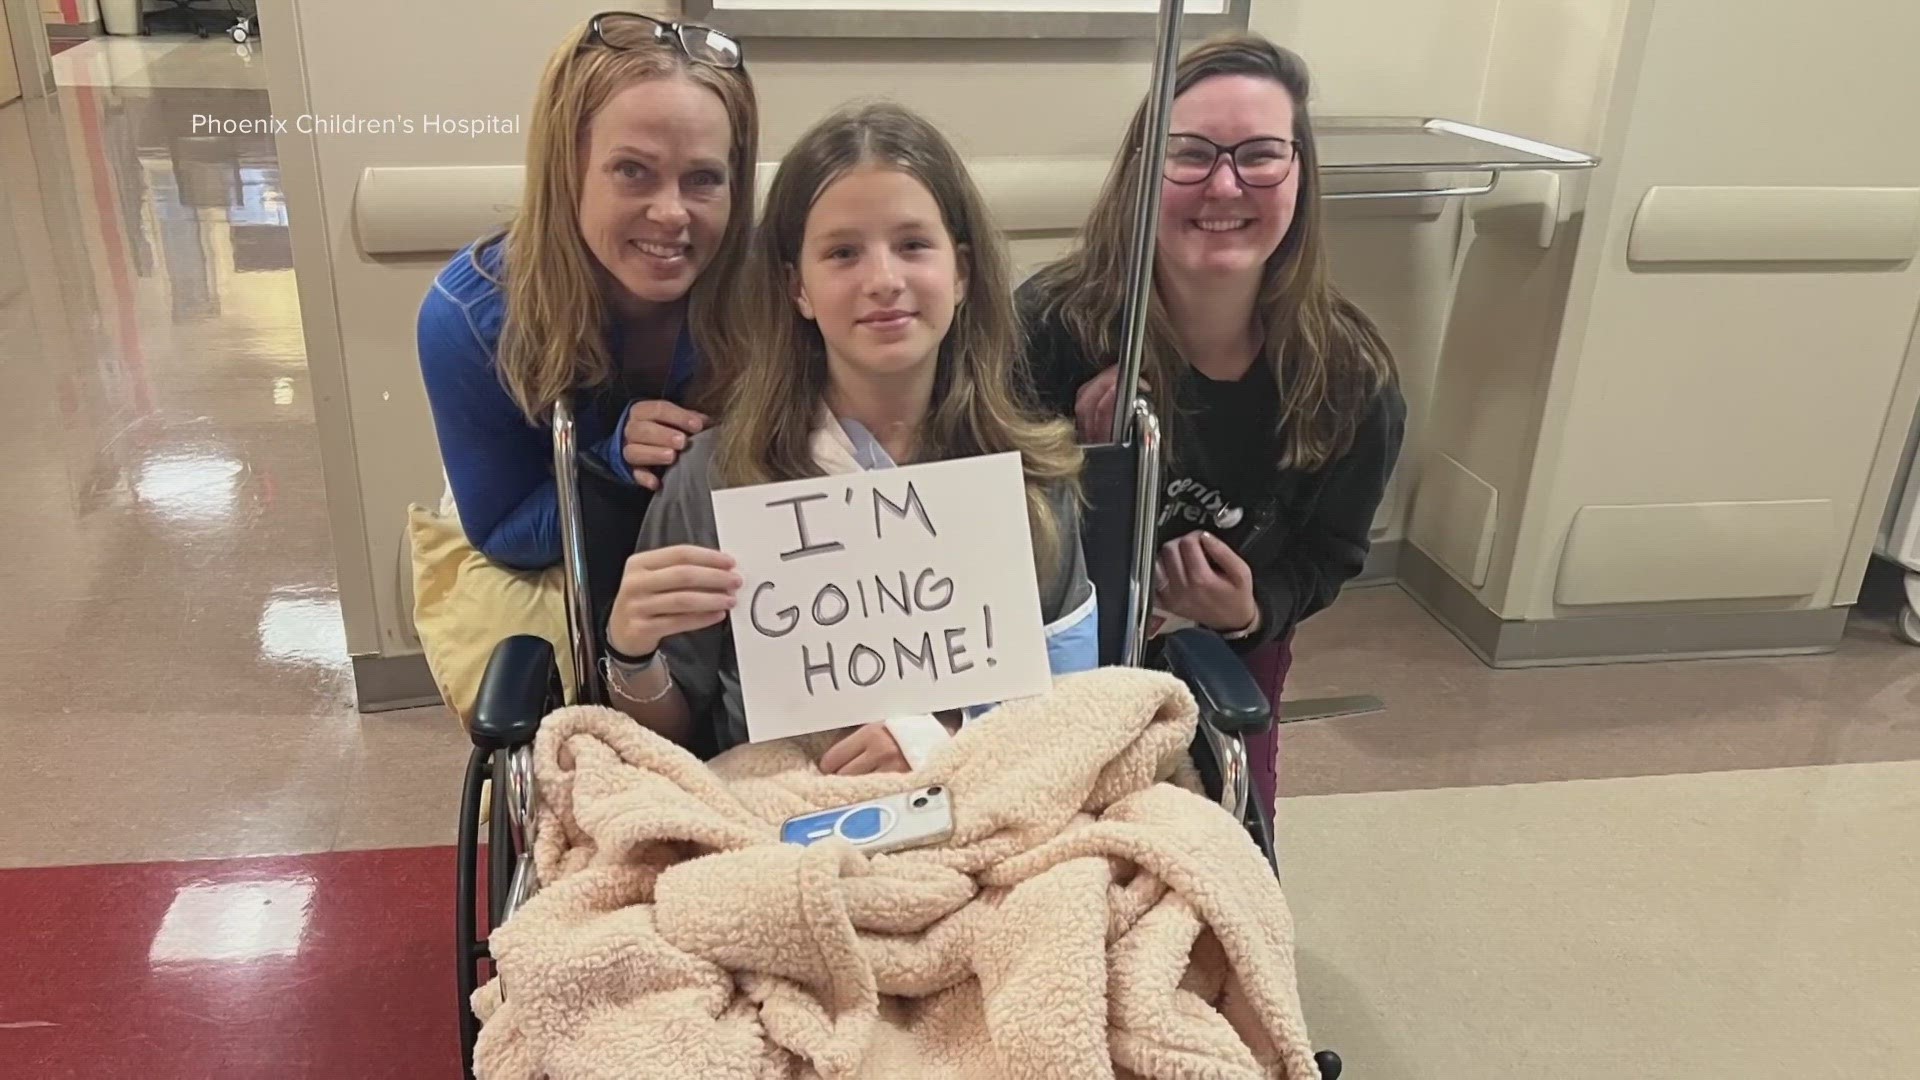 She collapsed during soccer practice from a cardiac arrest last month and now 12-year-old Pyper Midkiff is thanking those who rushed to help save her that day.